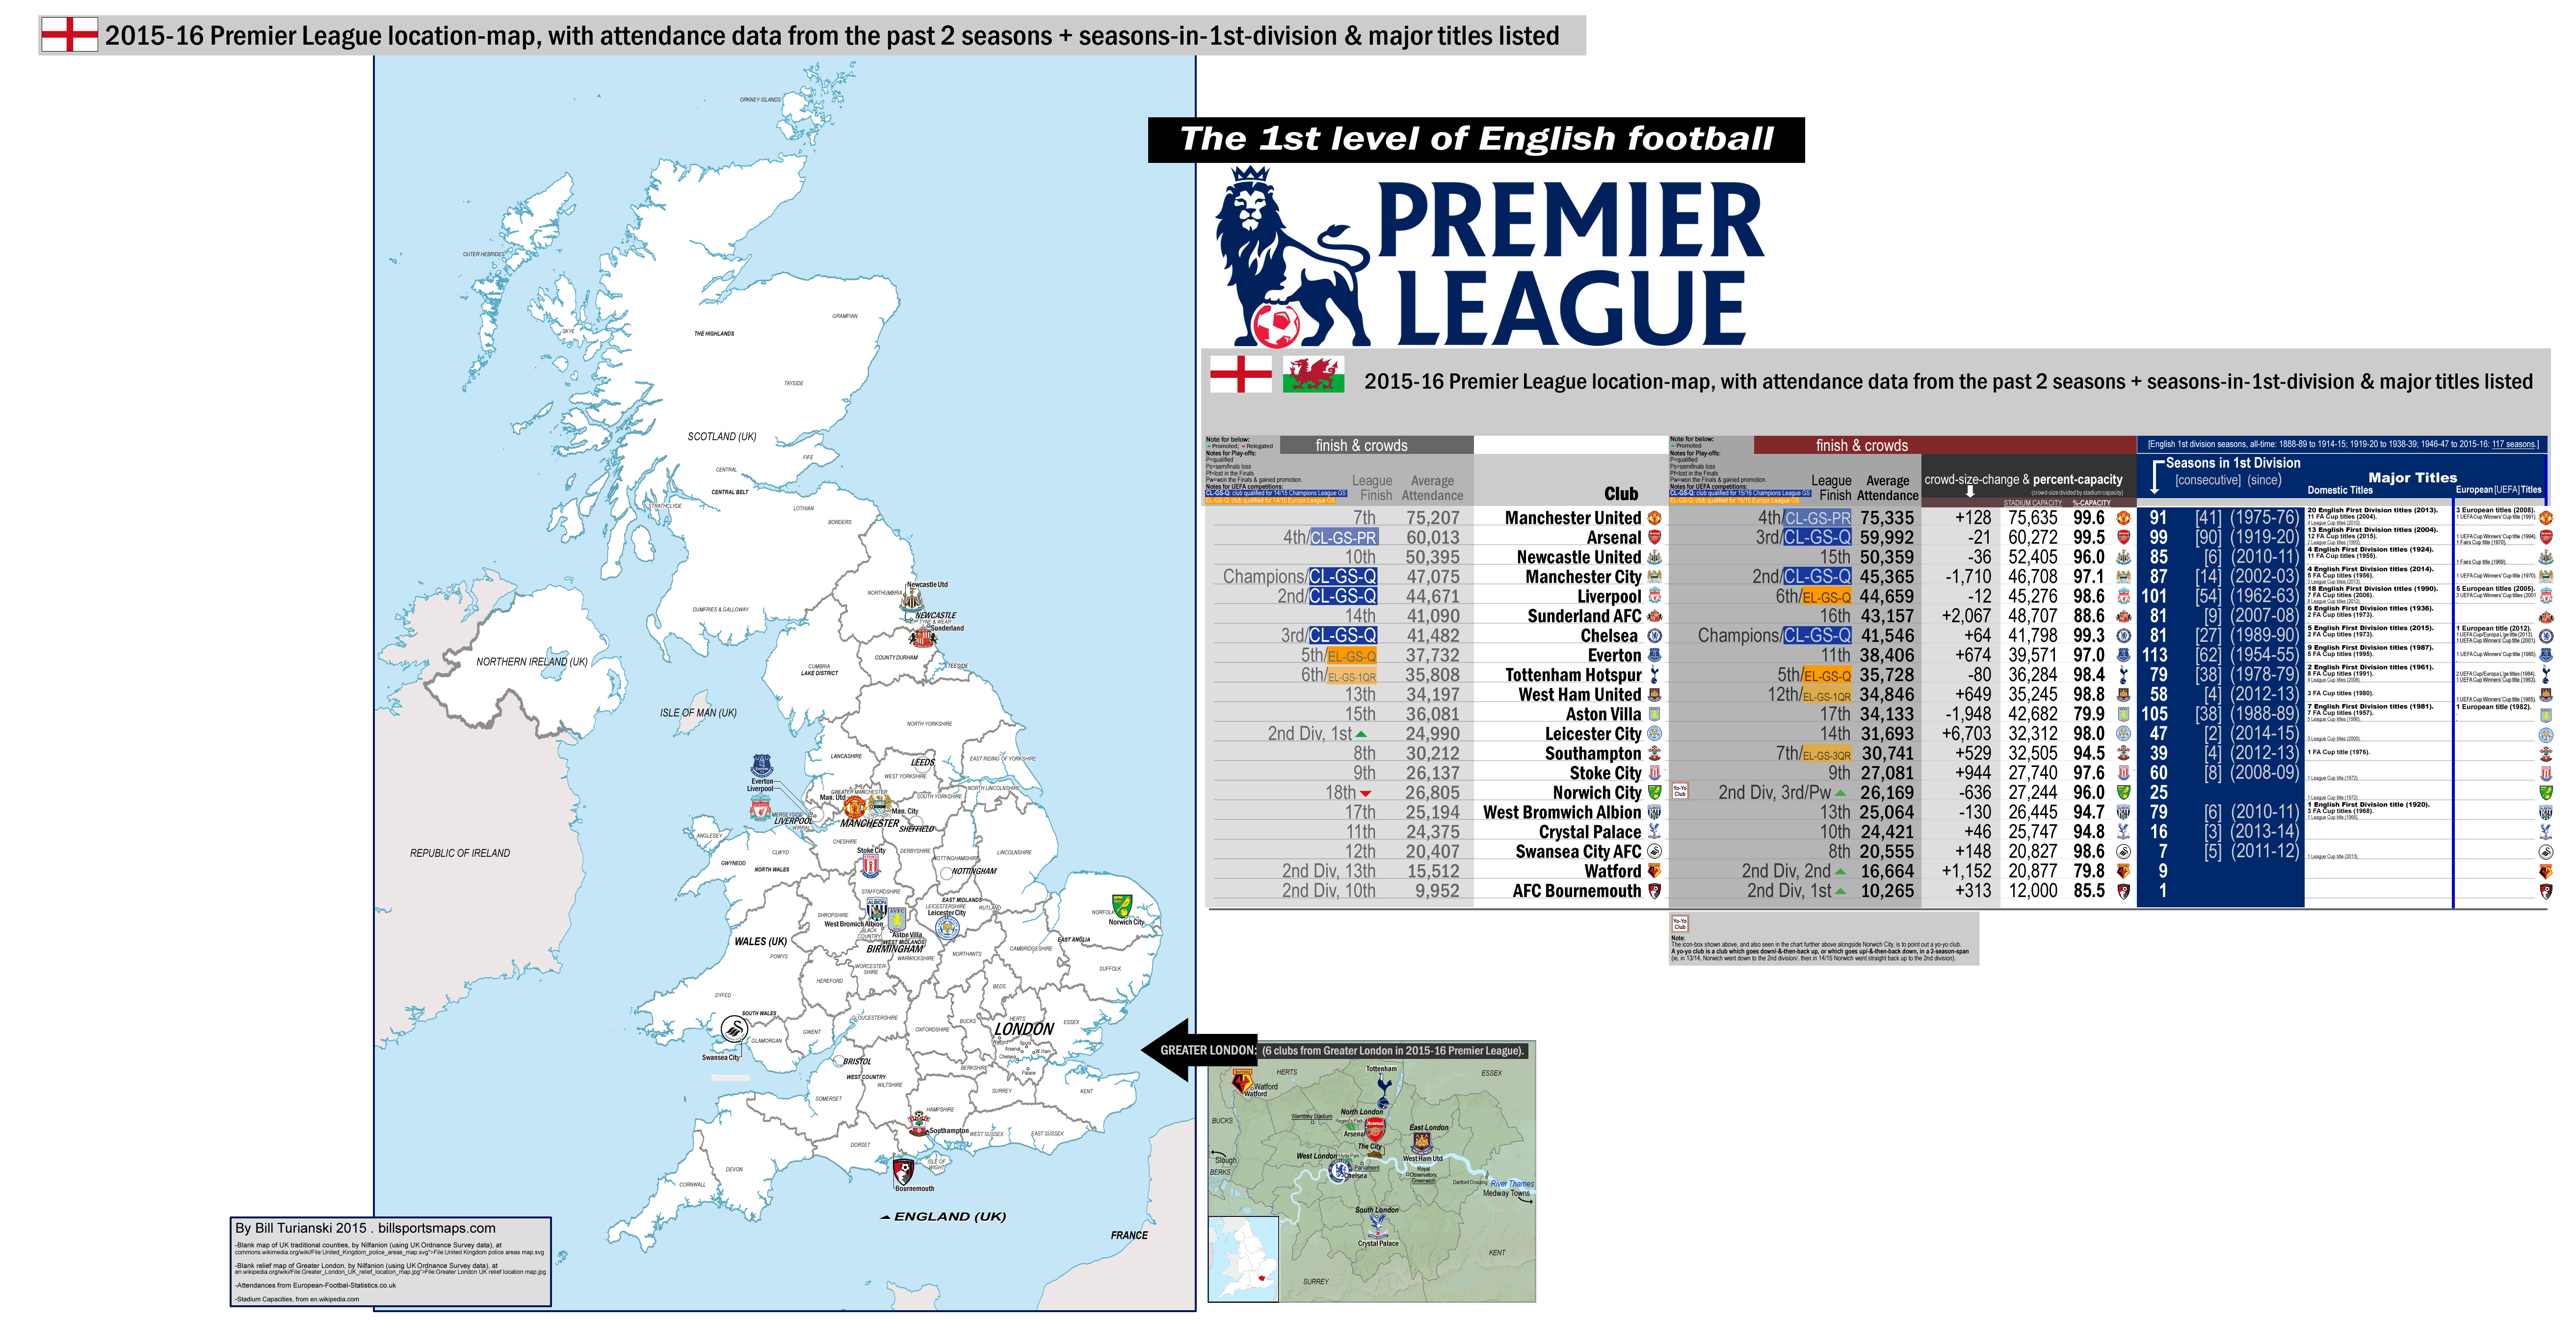 England: Premier League [1st division], location-map with 14/15 attendances, all-time ...